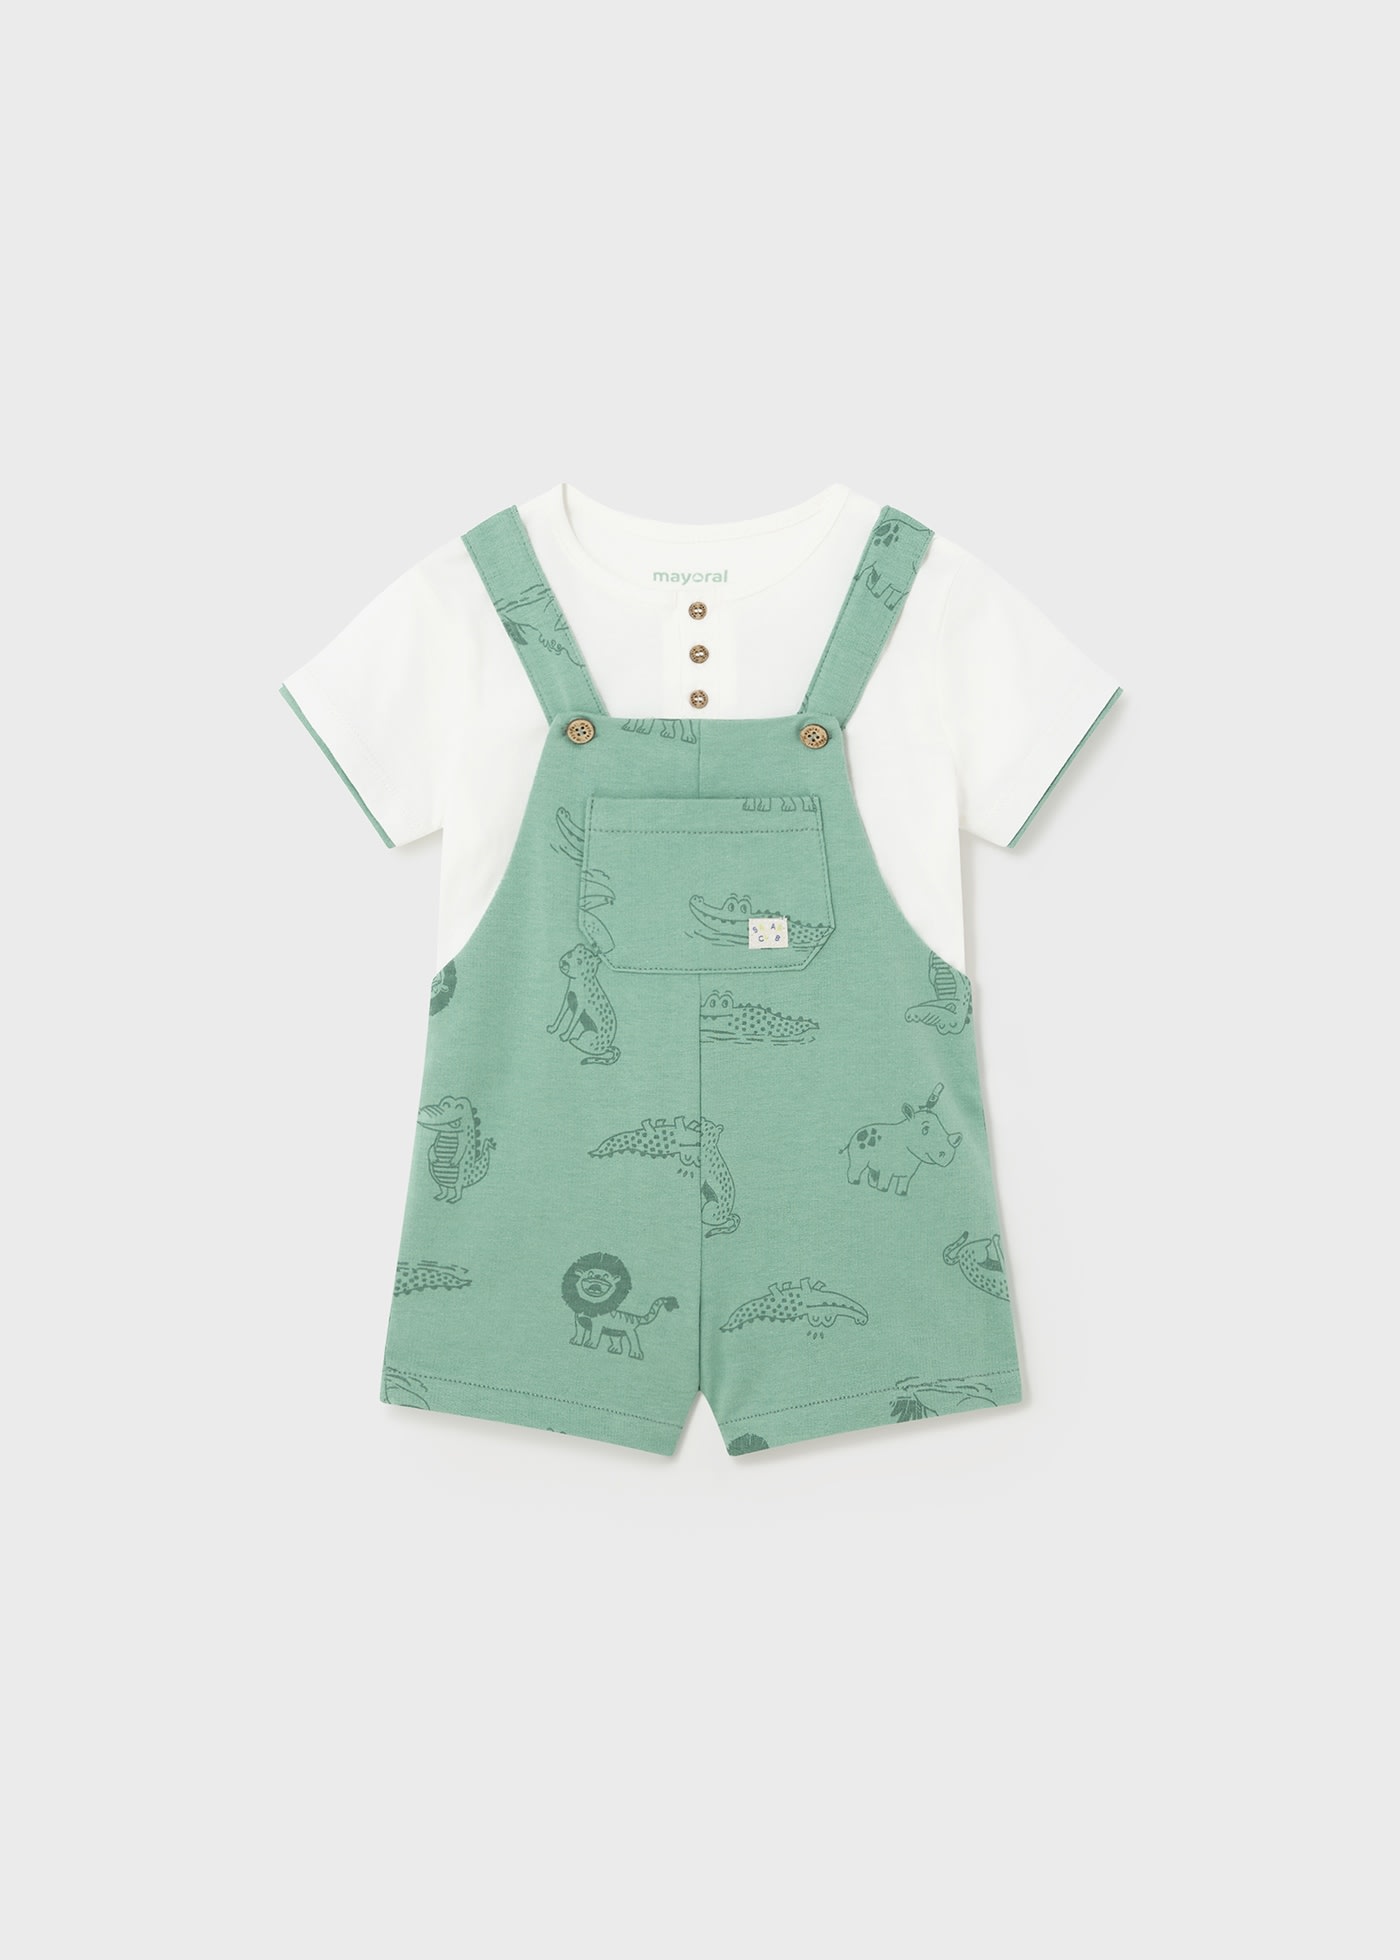 Baby 2-piece set dungaree and henley t-shirt